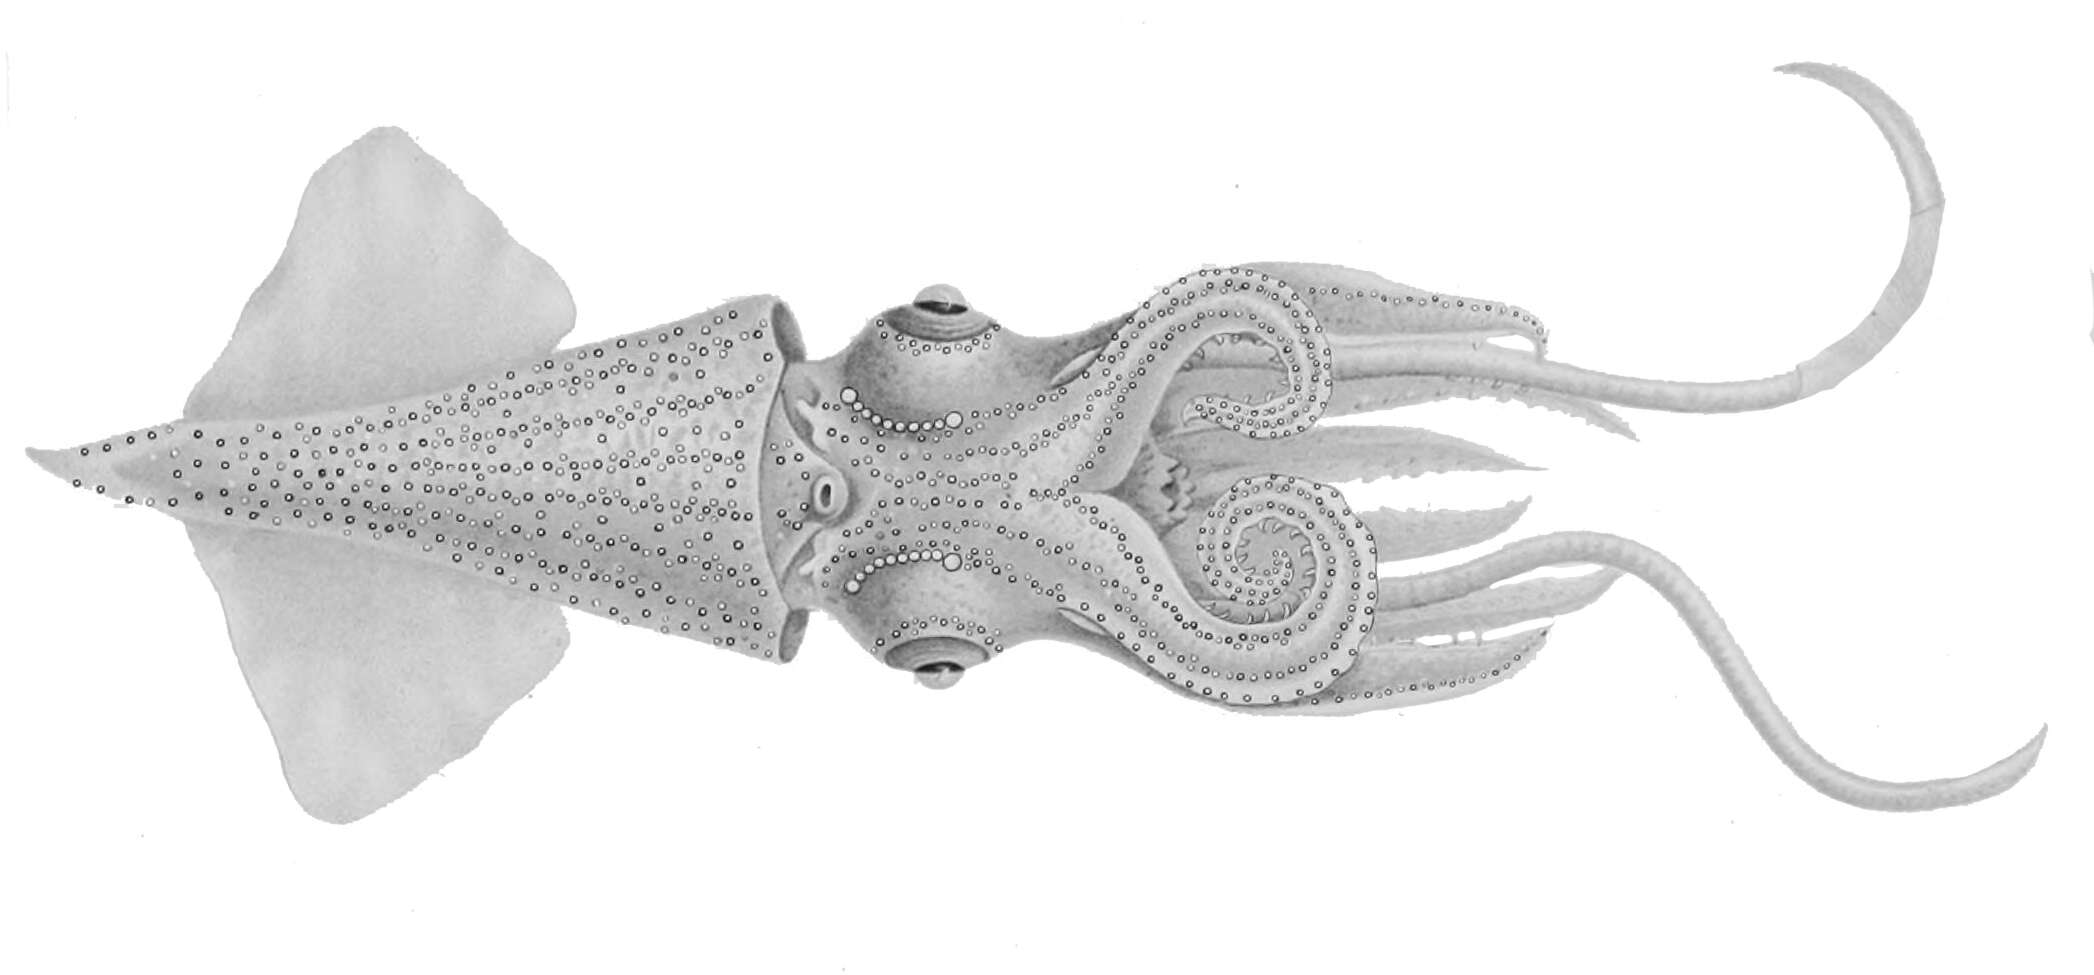 Image of Enoploteuthis leptura (Leach 1817)